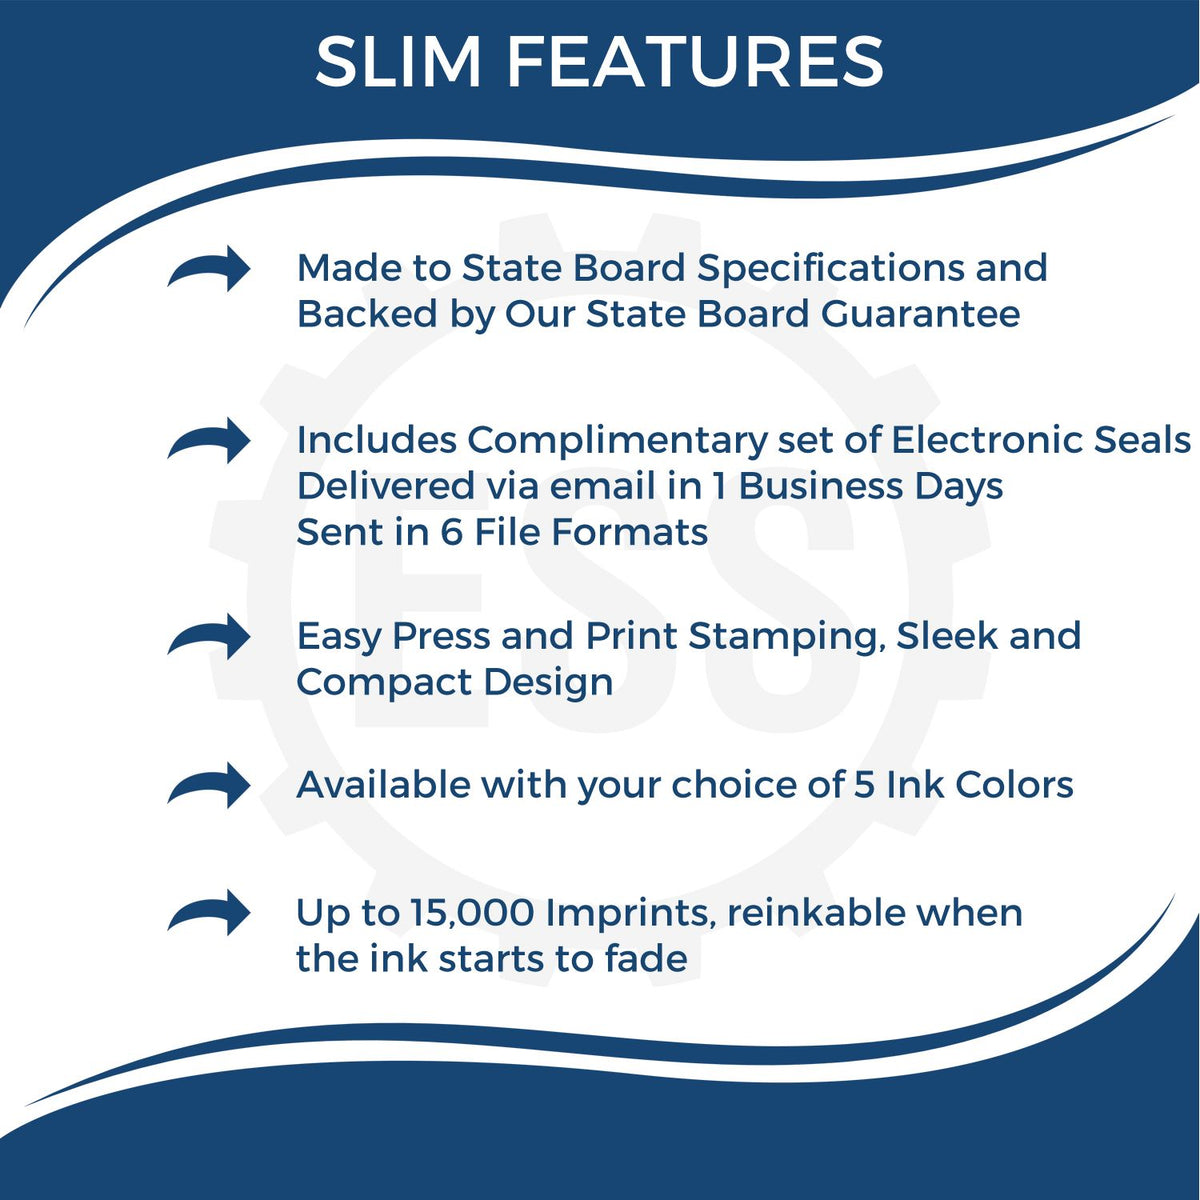 A picture of an infographic highlighting the selling points for the Super Slim Delaware Notary Public Stamp